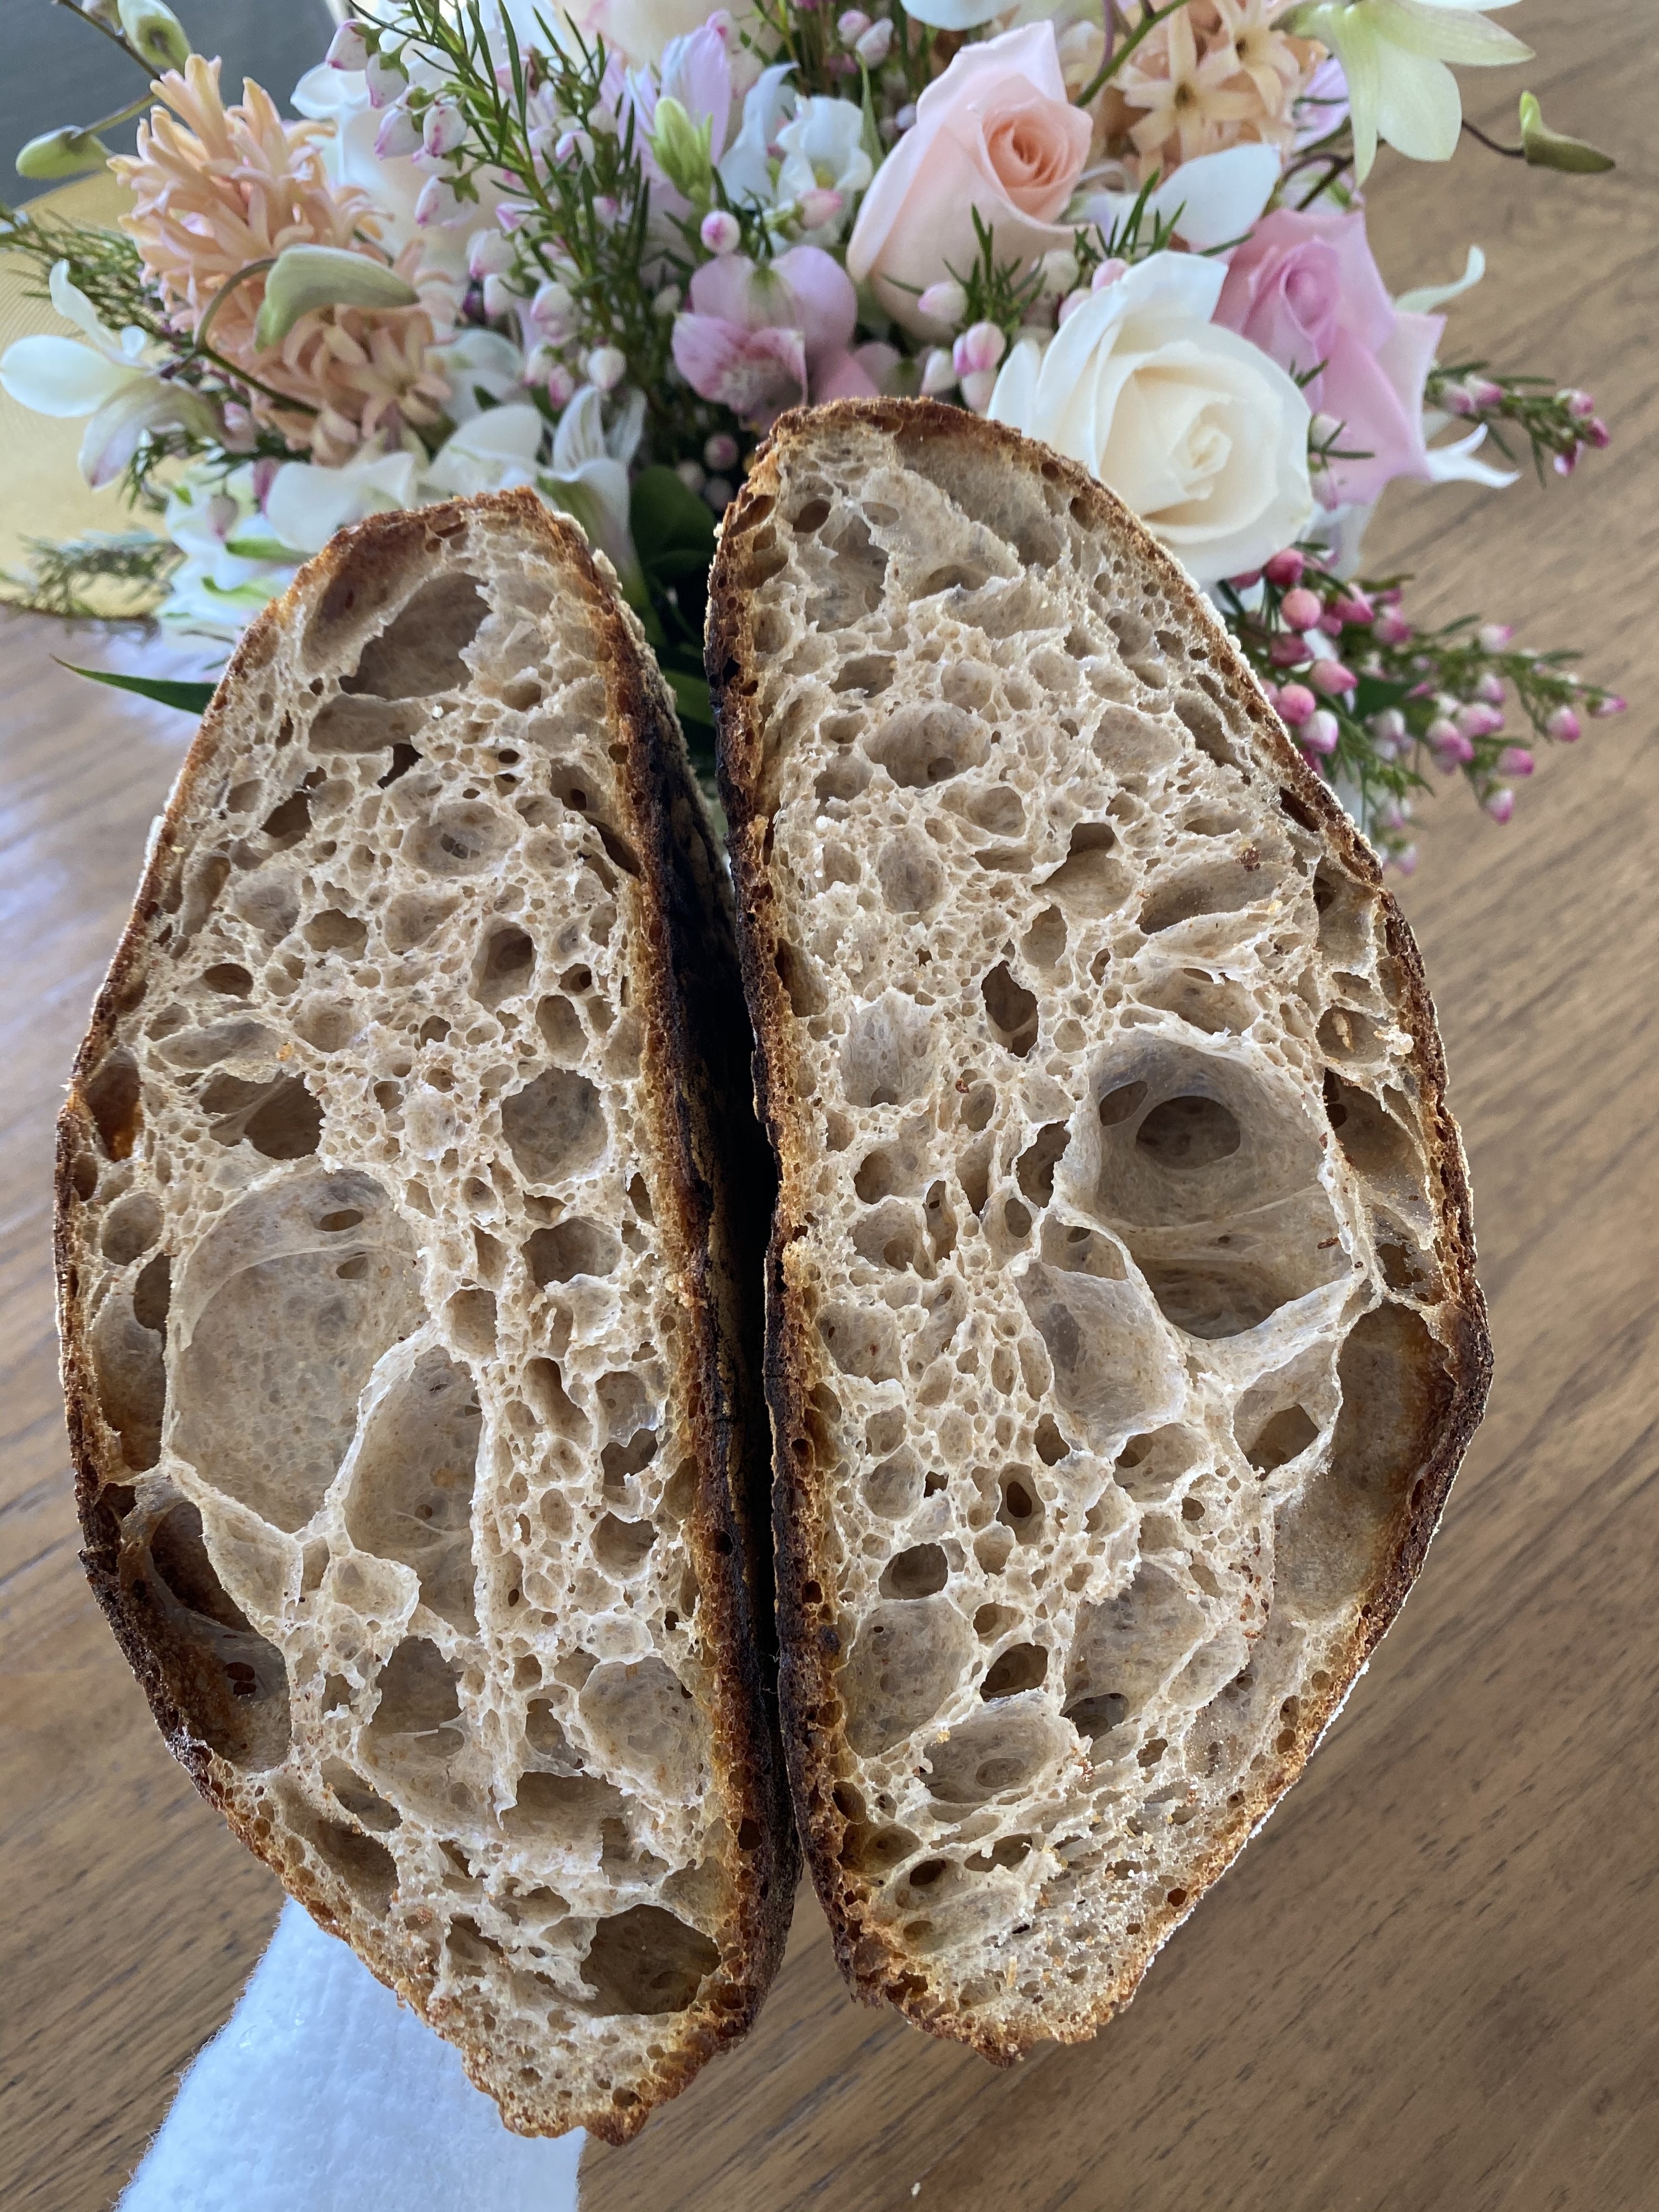 A crumb shot of a loaf of sourdough with lots of air holes.